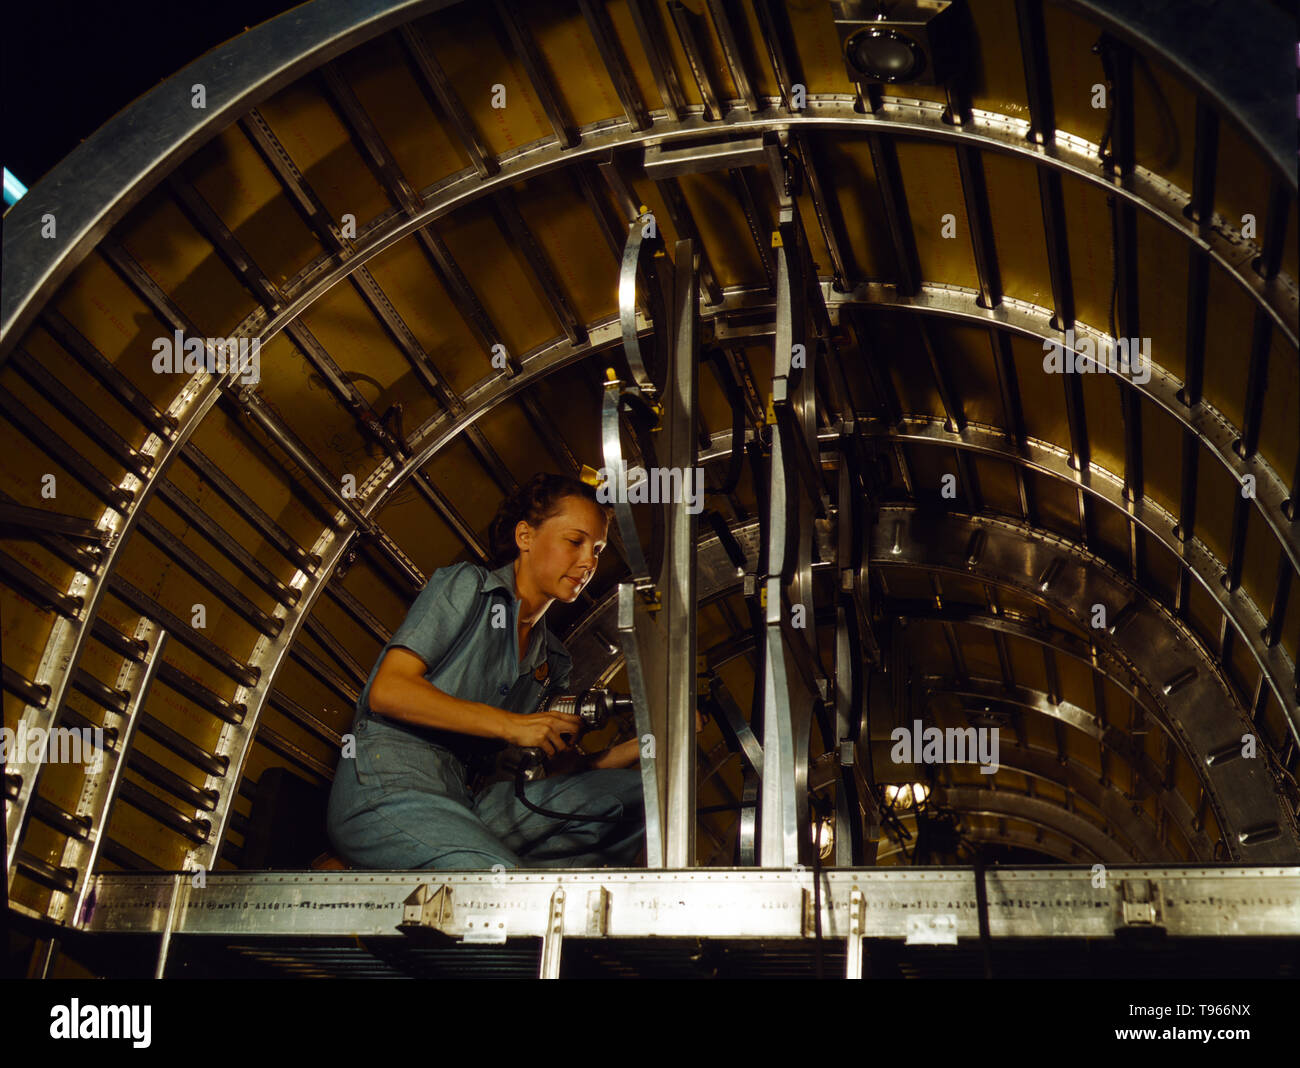 Production of B-24 bombers and C-87 transports, Consolidated Aircraft Corp., Fort Worth, Texas. Cabbie Coleman, former housewife, works at western aircraft plant. Installing of oxygen racks above the flight deck. Although the image of 'Rosie the Riveter' reflected the industrial work of welders and riveters, the majority of working women filled non-factory positions in every sector of the economy. What unified the experiences of these women was that they proved to themselves, and the country, that they could do a man's job and could do it well. Photographed by Howard R. Hollem, 1942. Stock Photo